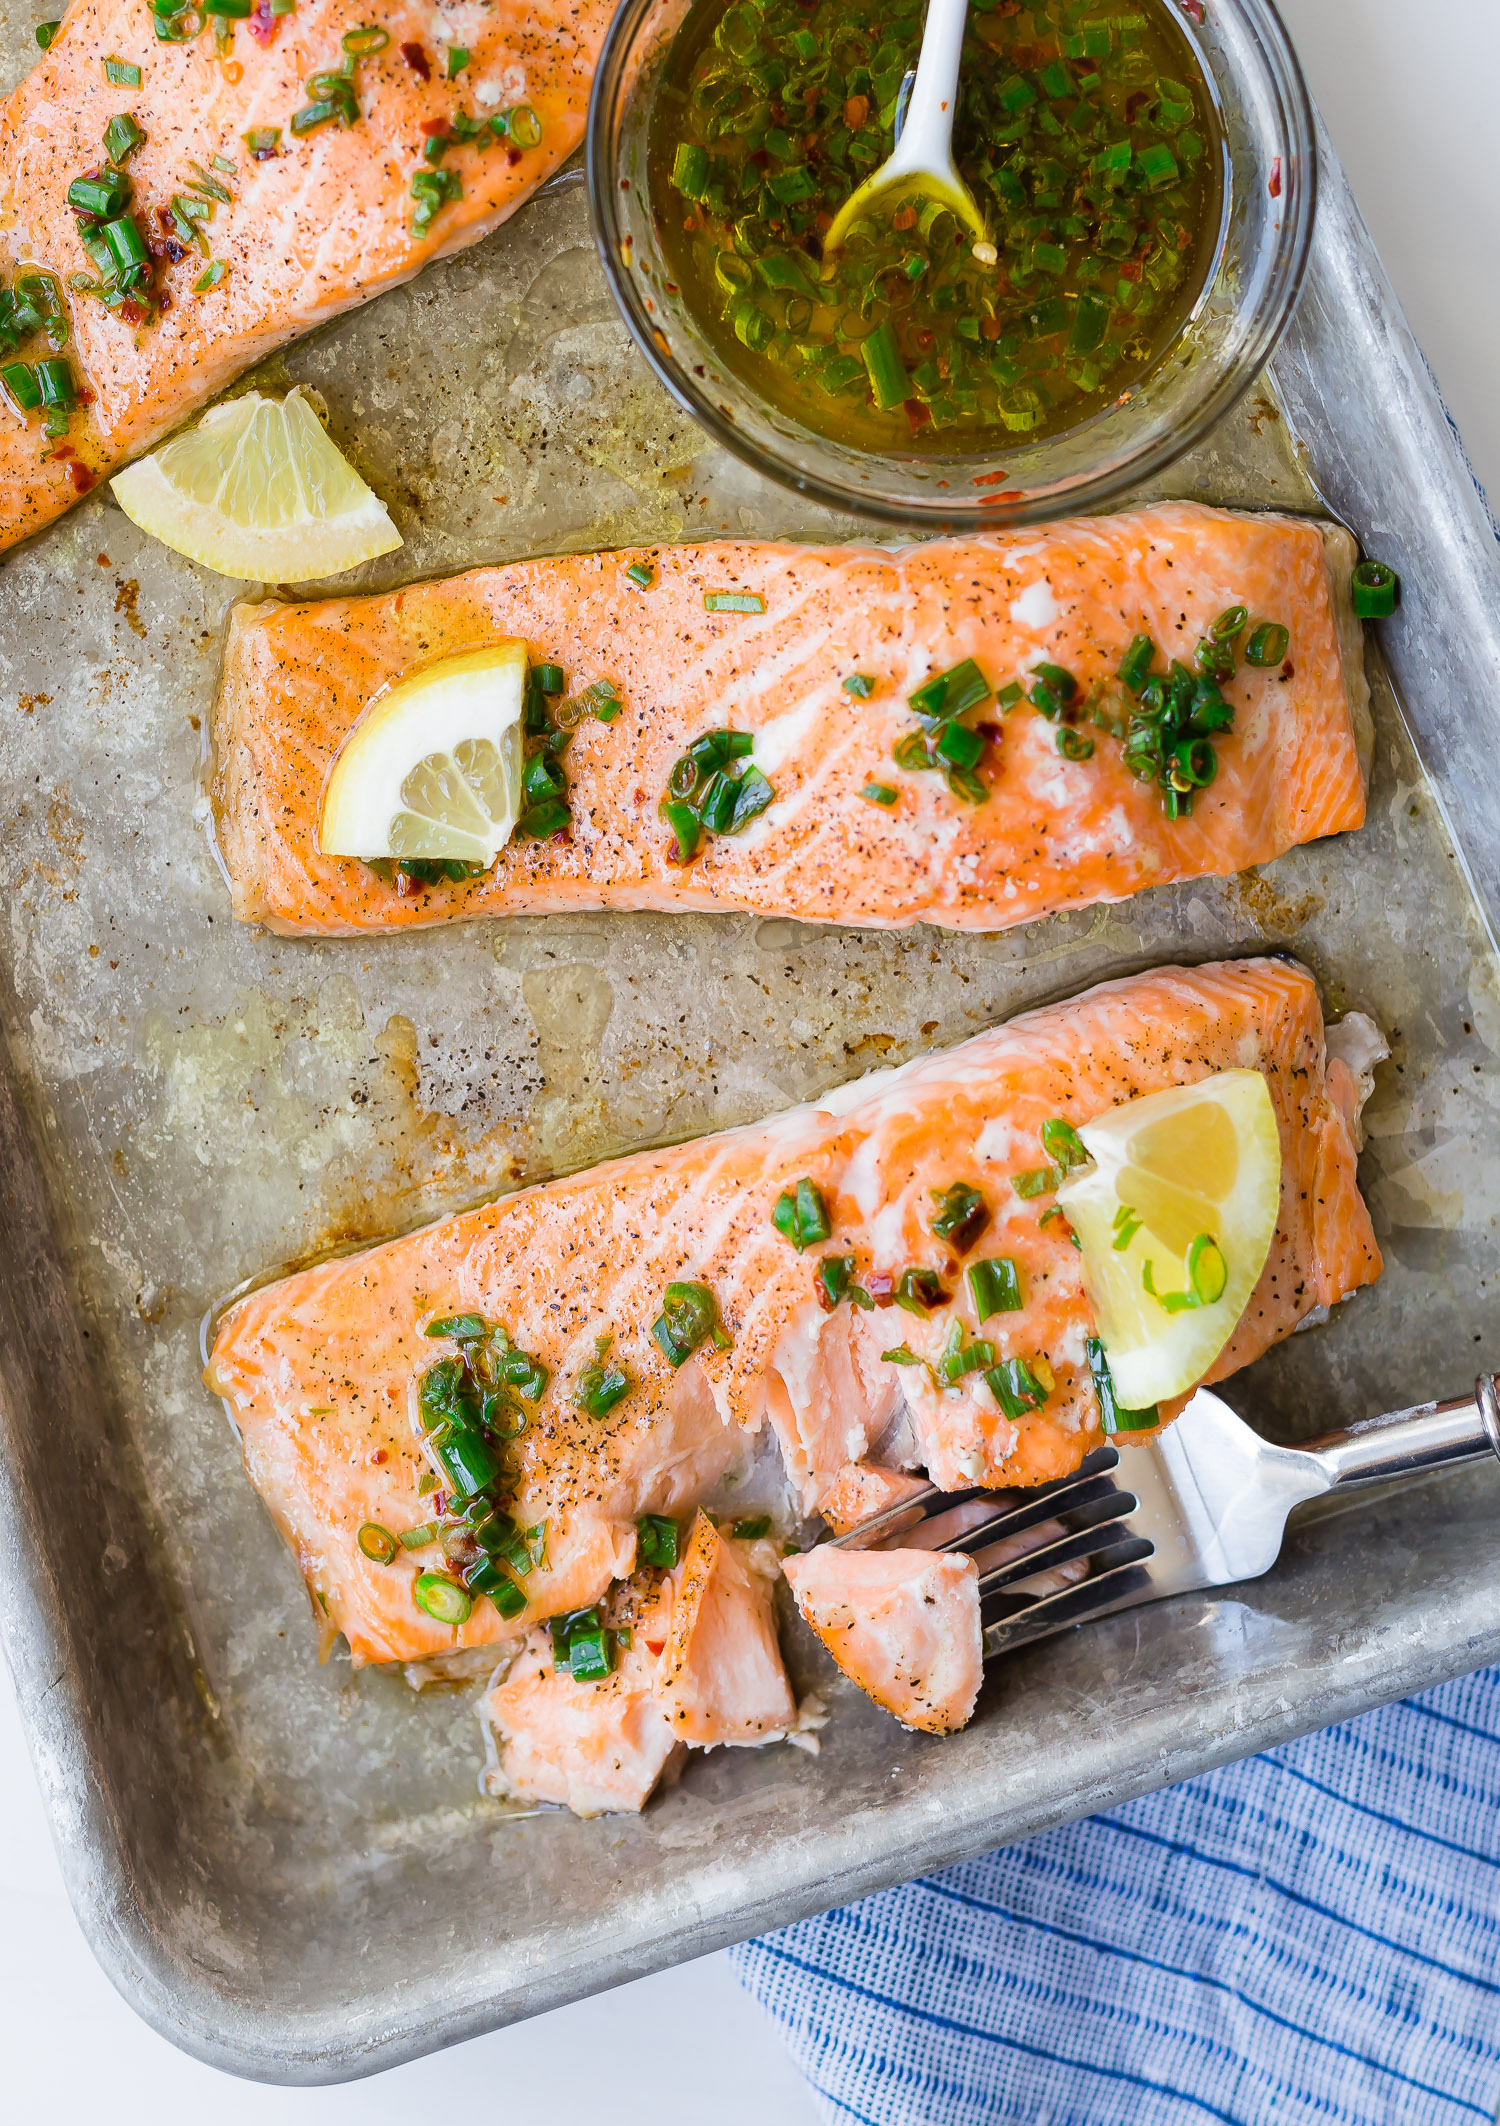 Salmon being flaked with fork.